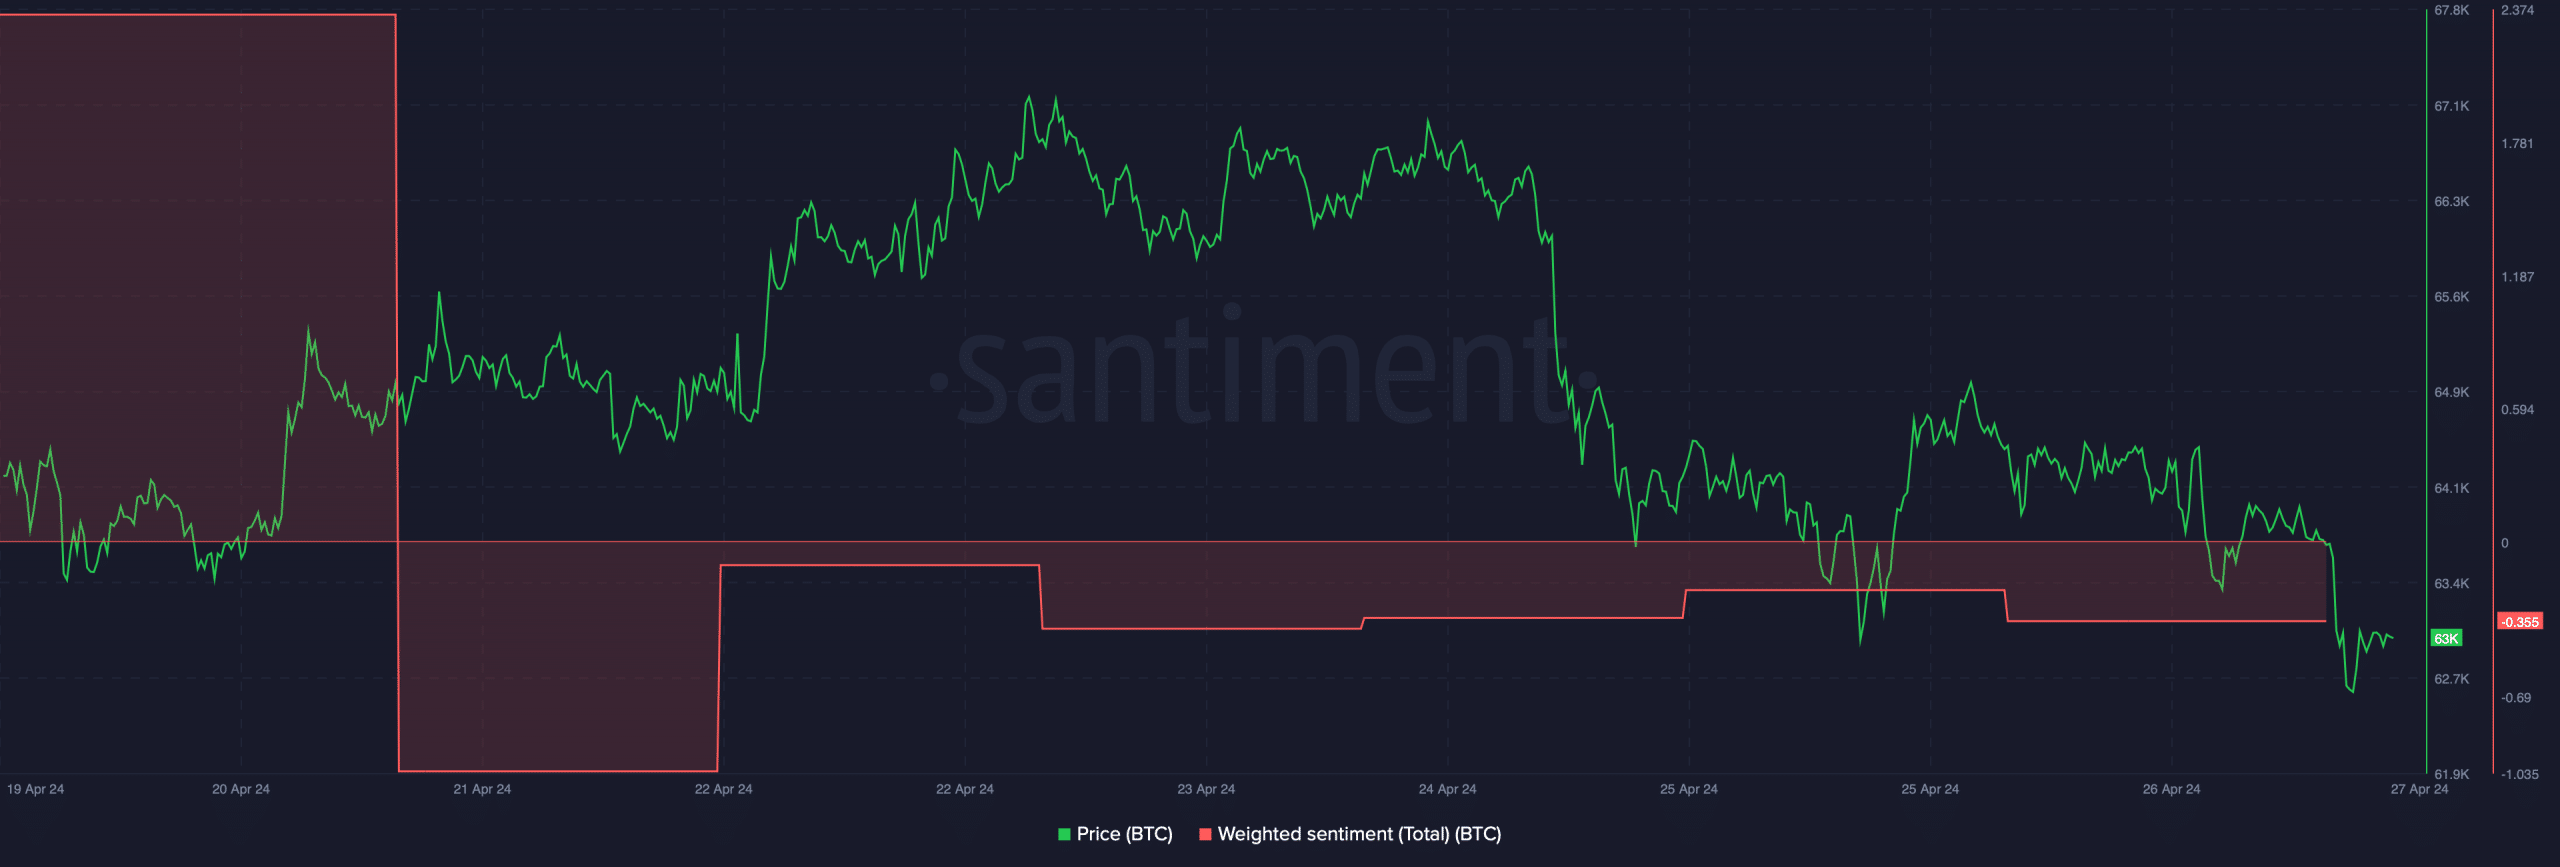 Bitcoin weighted sentiment declined